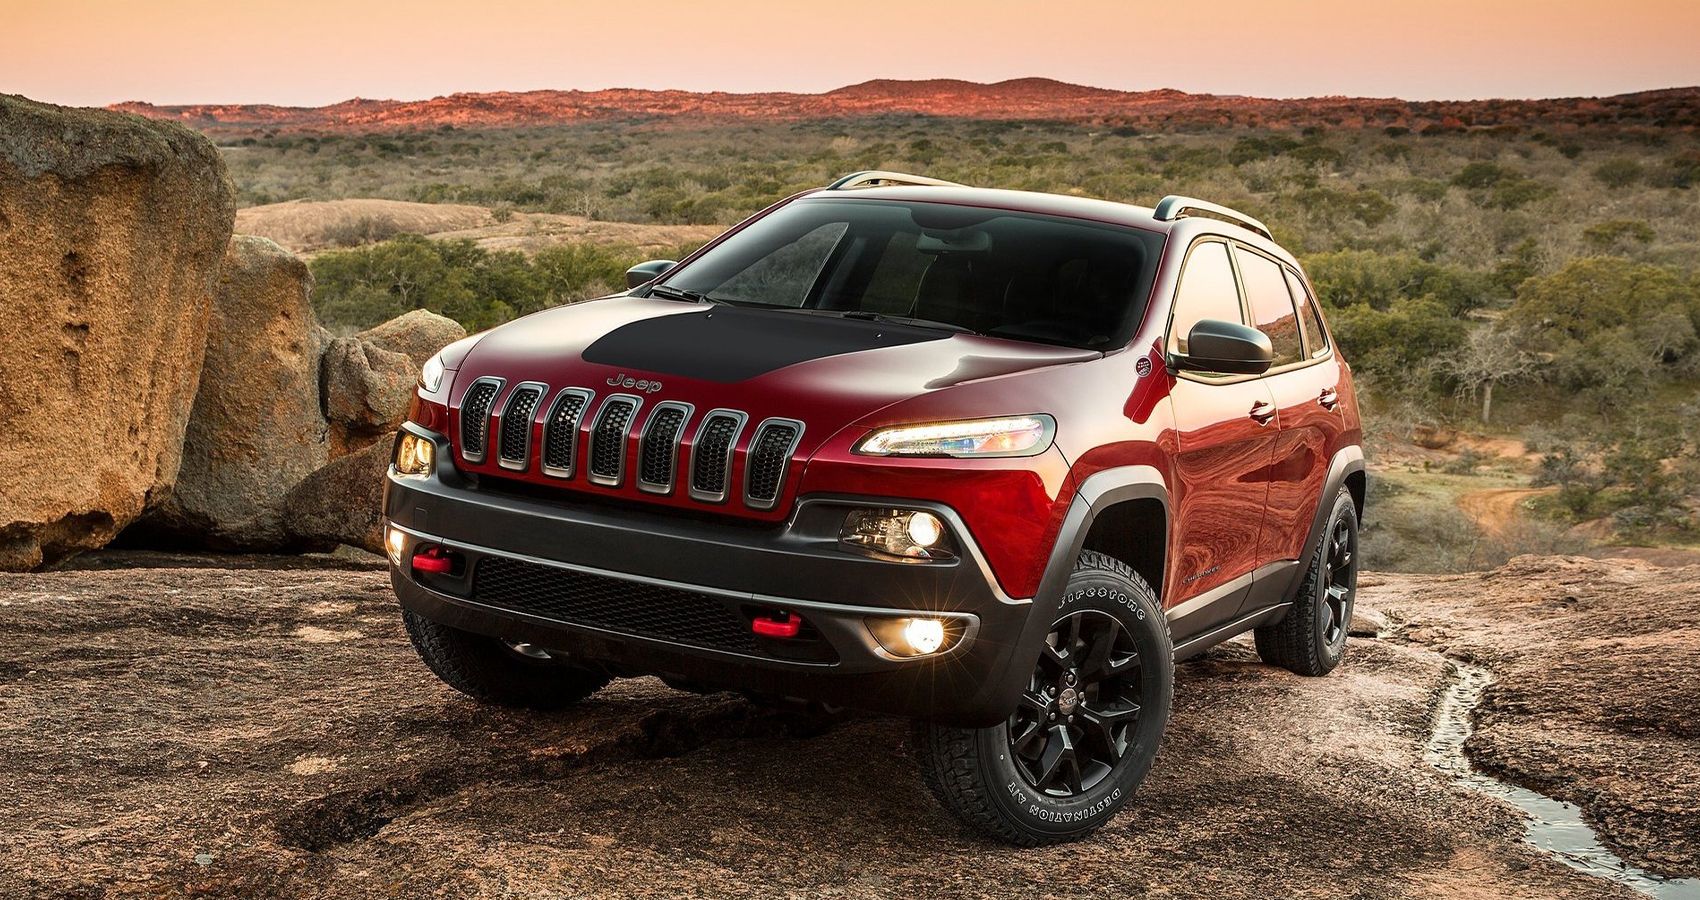 2014 Jeep Cherokee in Red Offroad